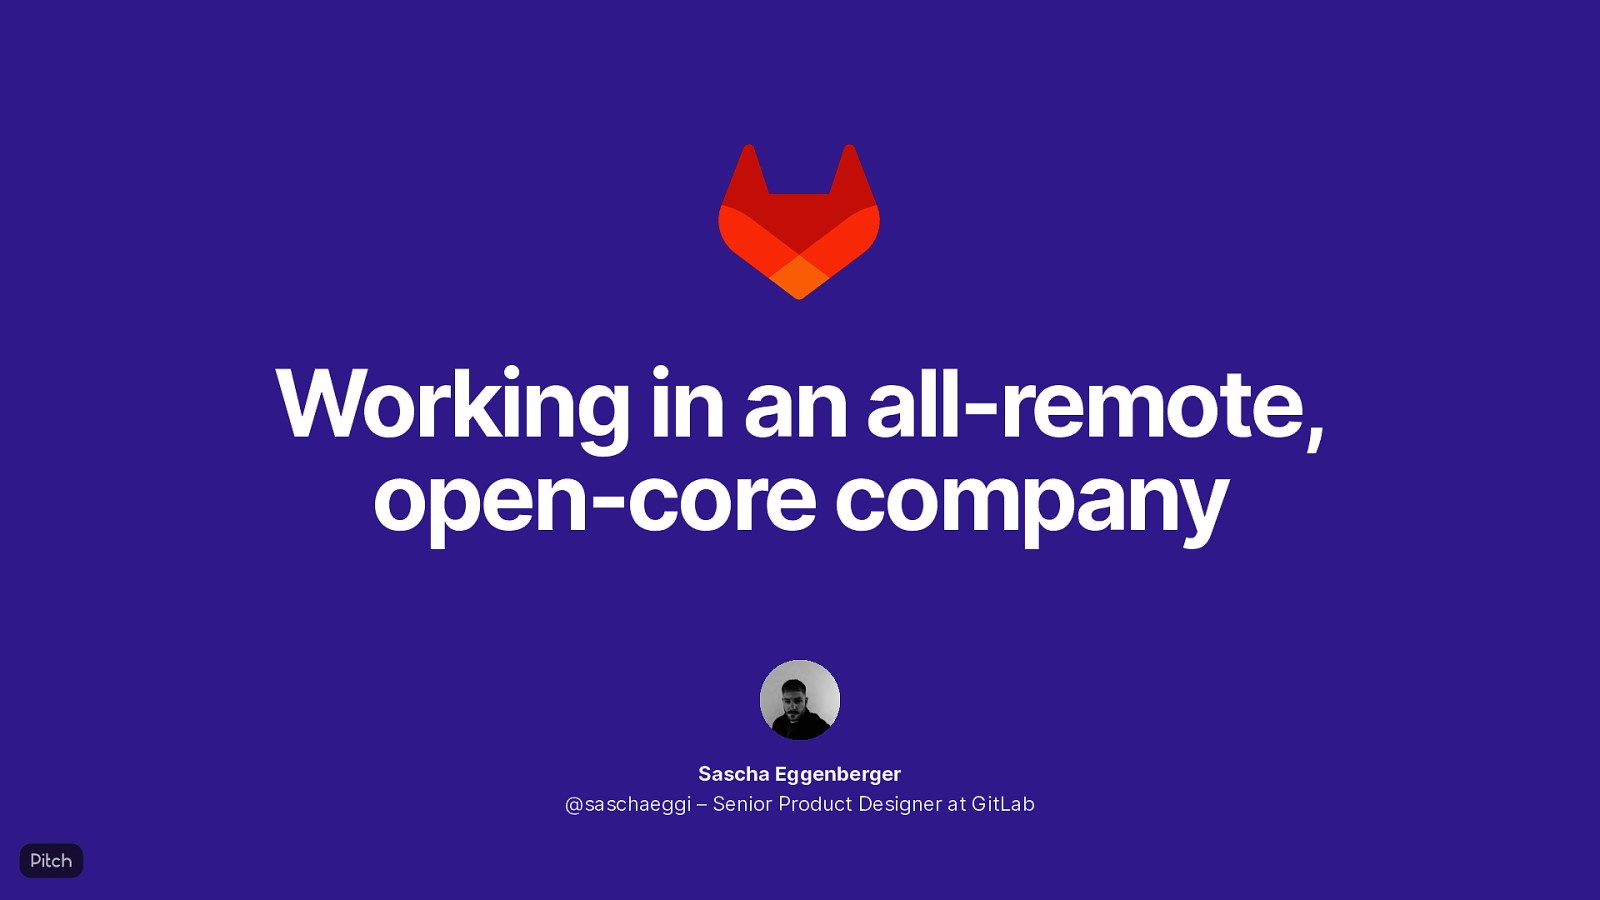 Working in an all-remote, open-core company by Sascha Eggenberger